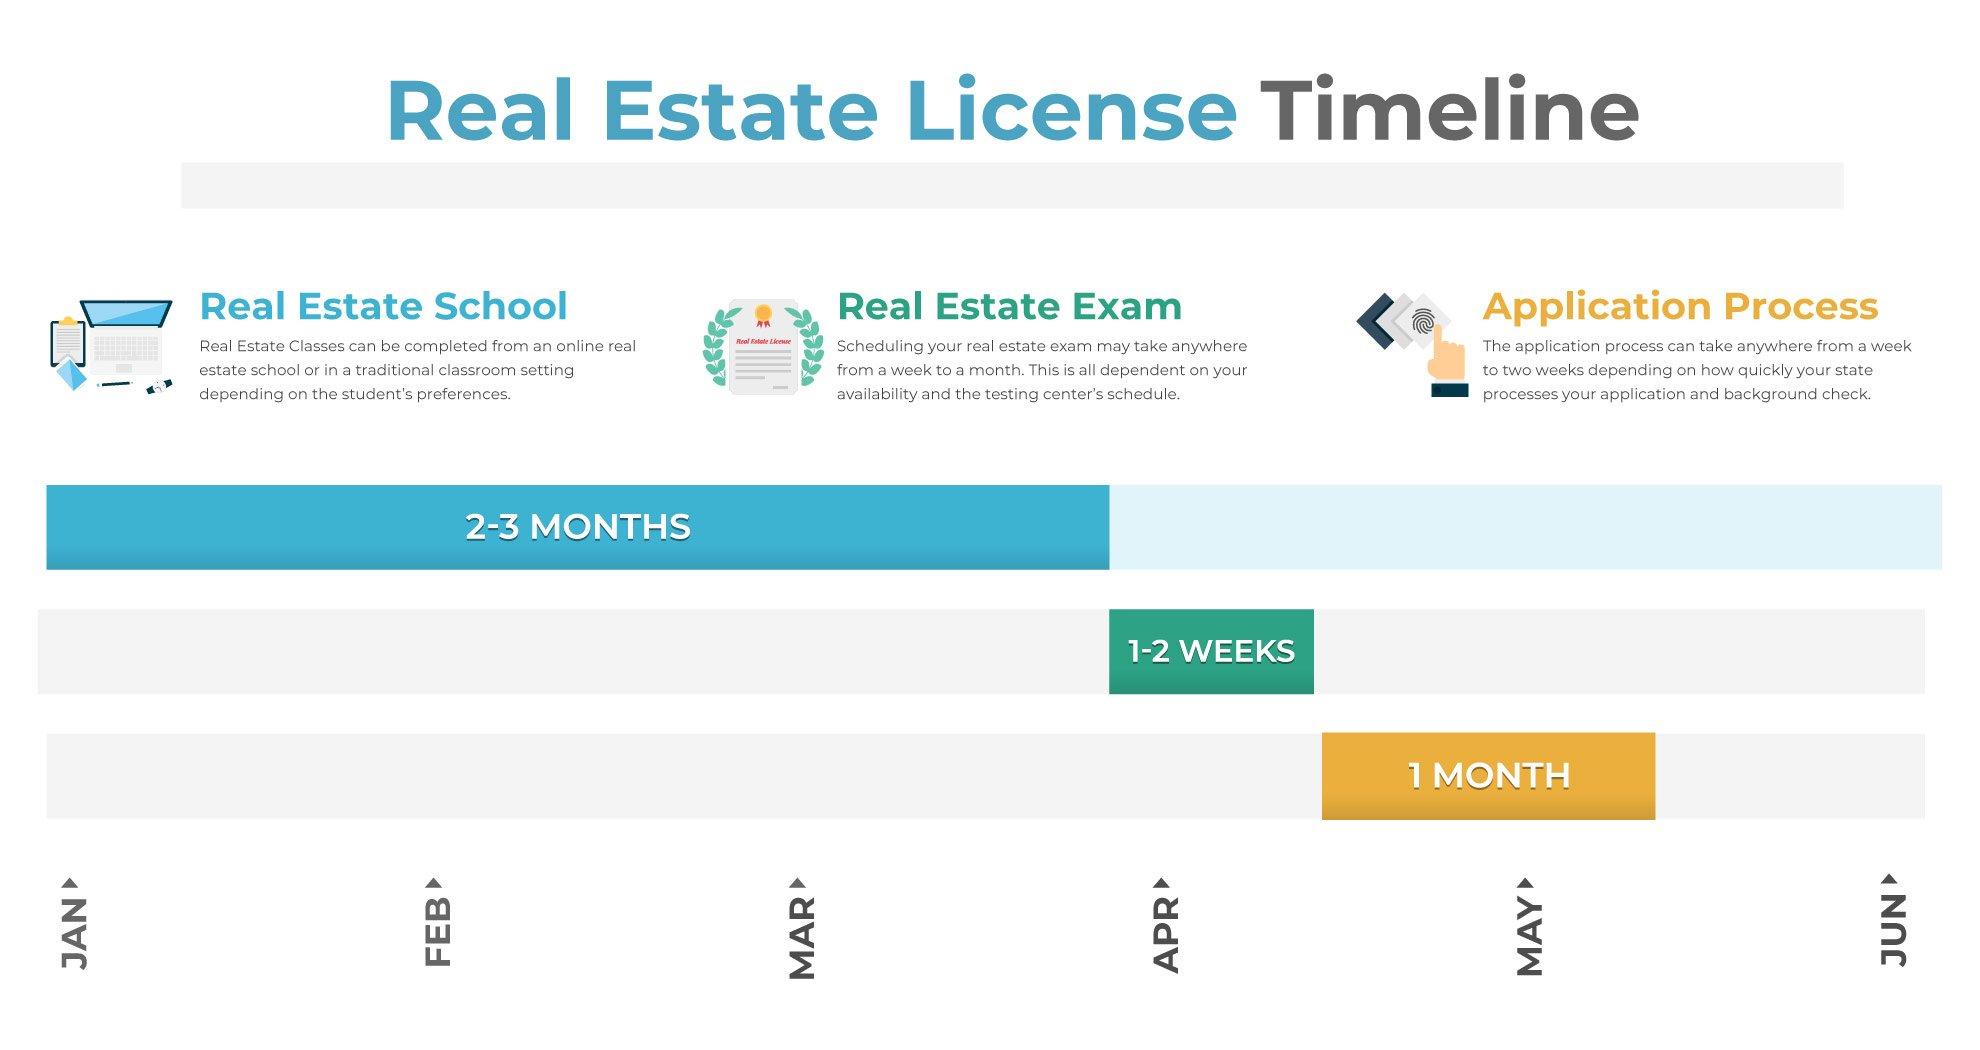 How long is schooling for real estate